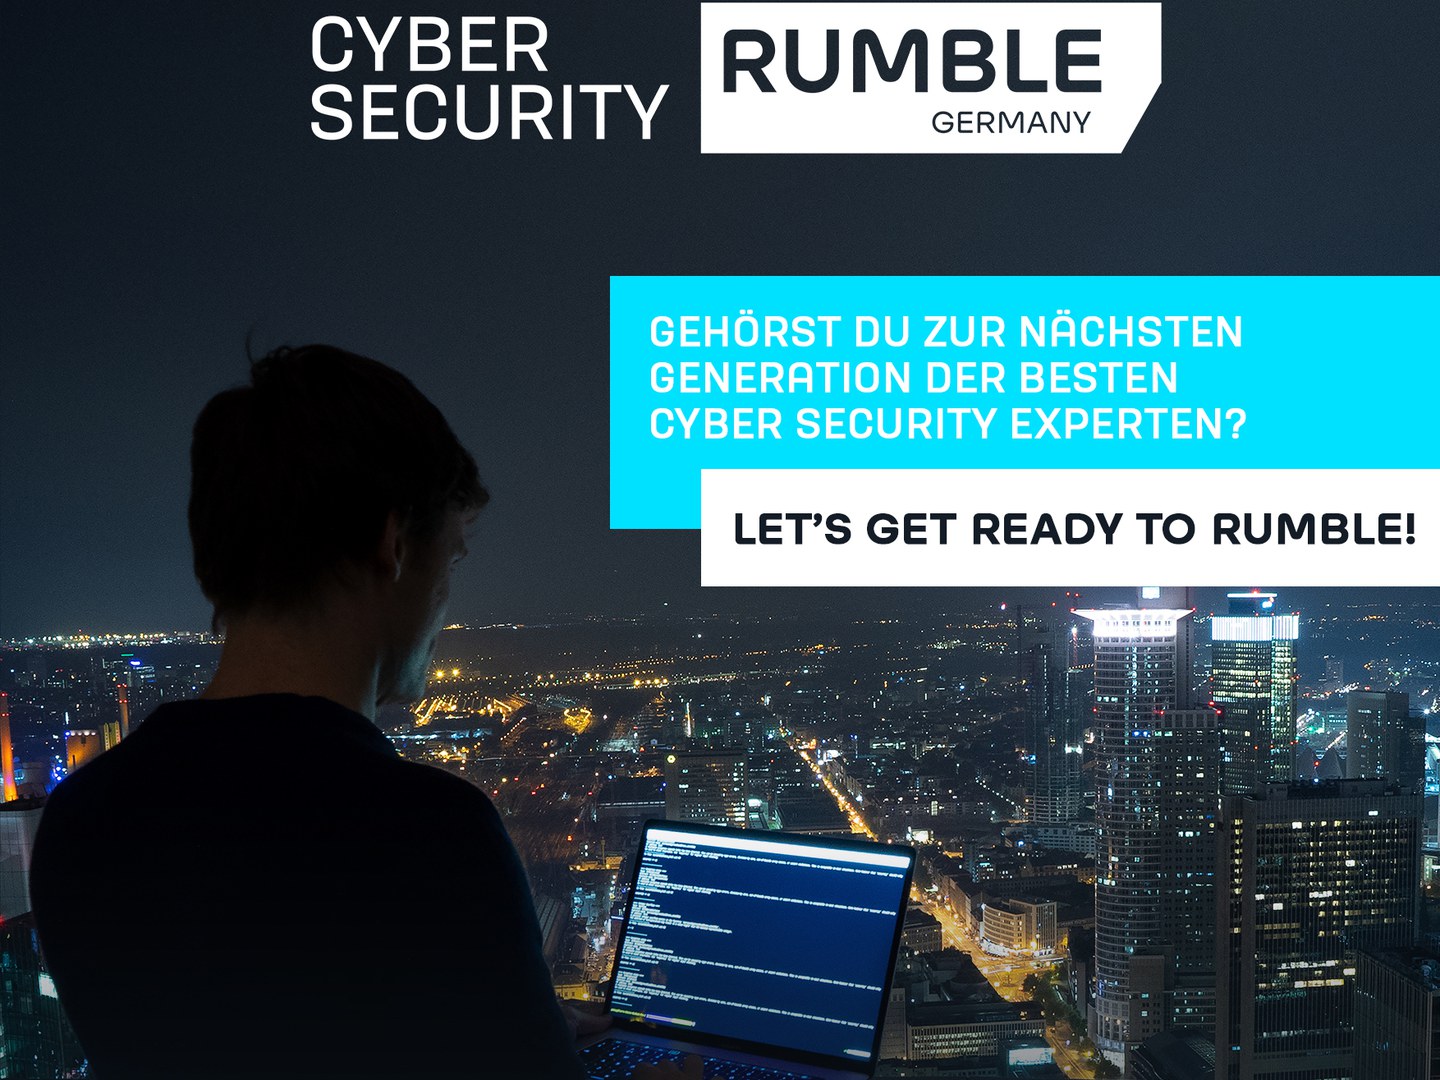 Der Cyber Security Rumble Germany